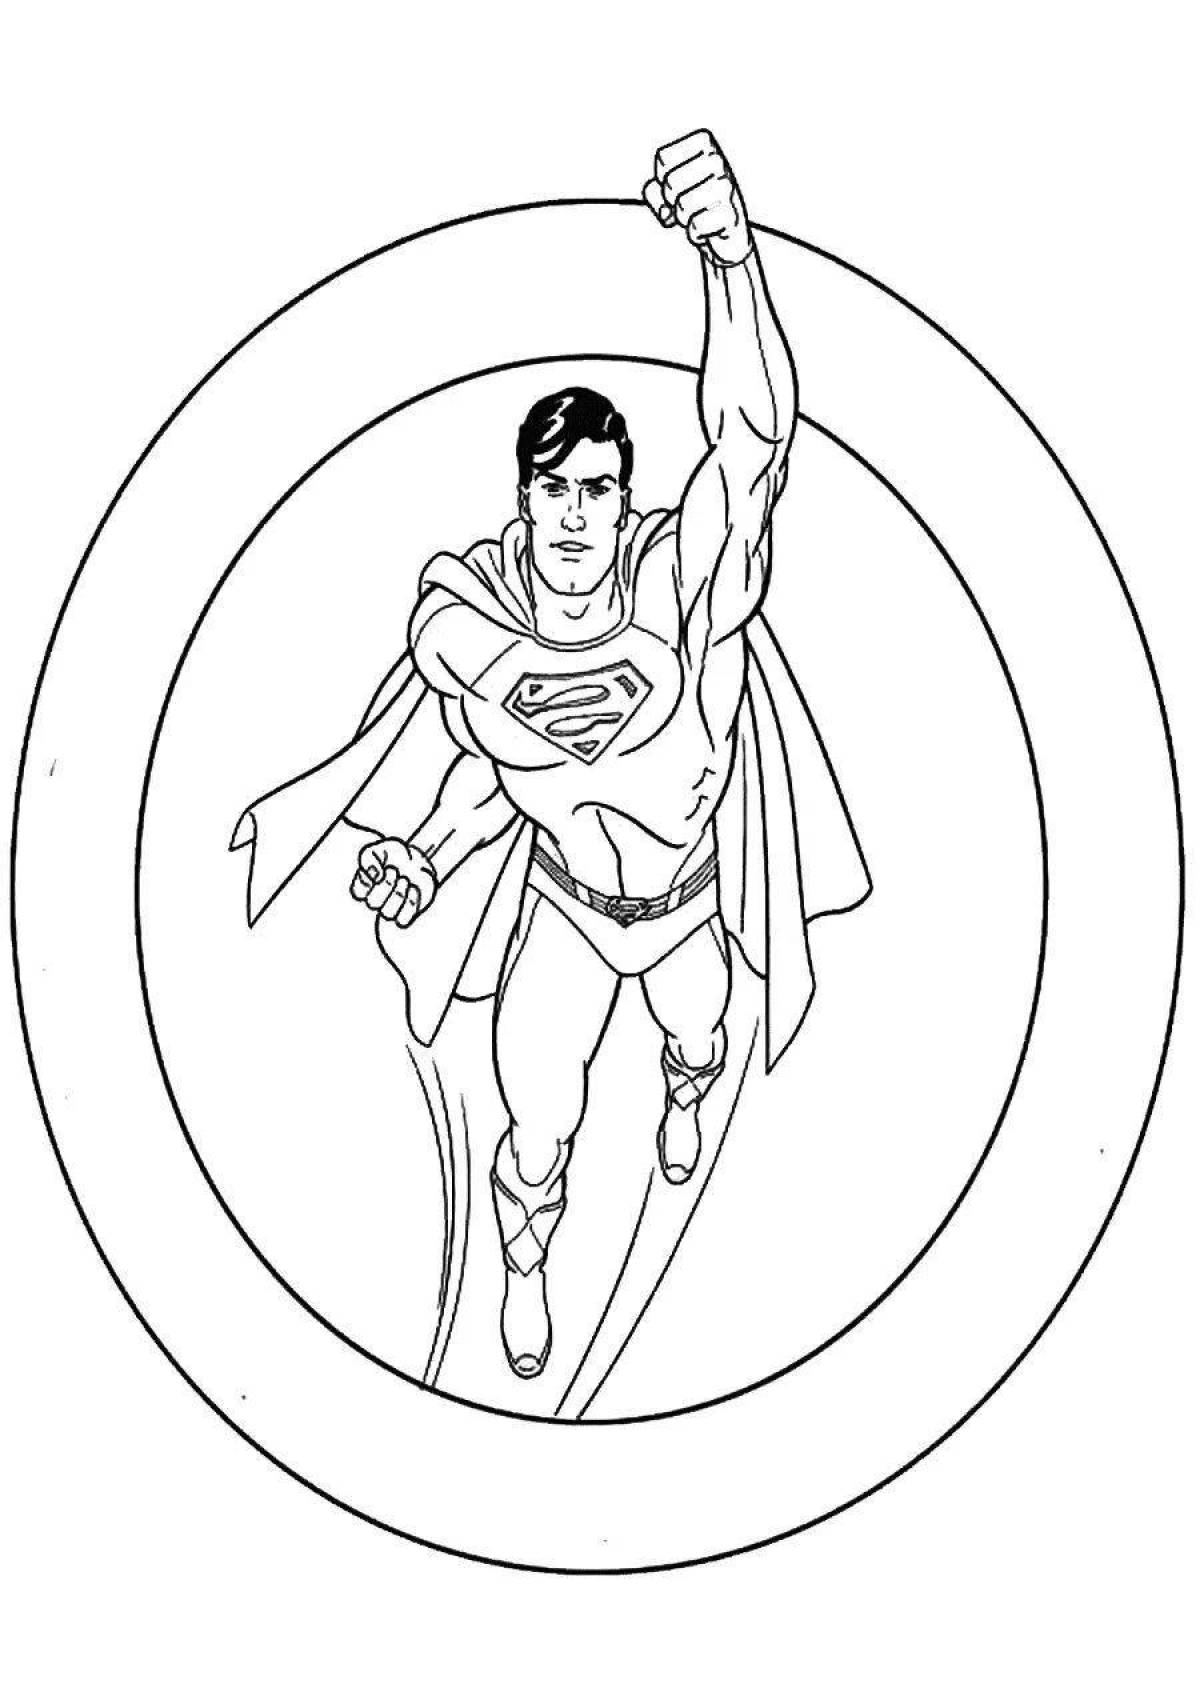 Great superman coloring book for kids 3-4 years old